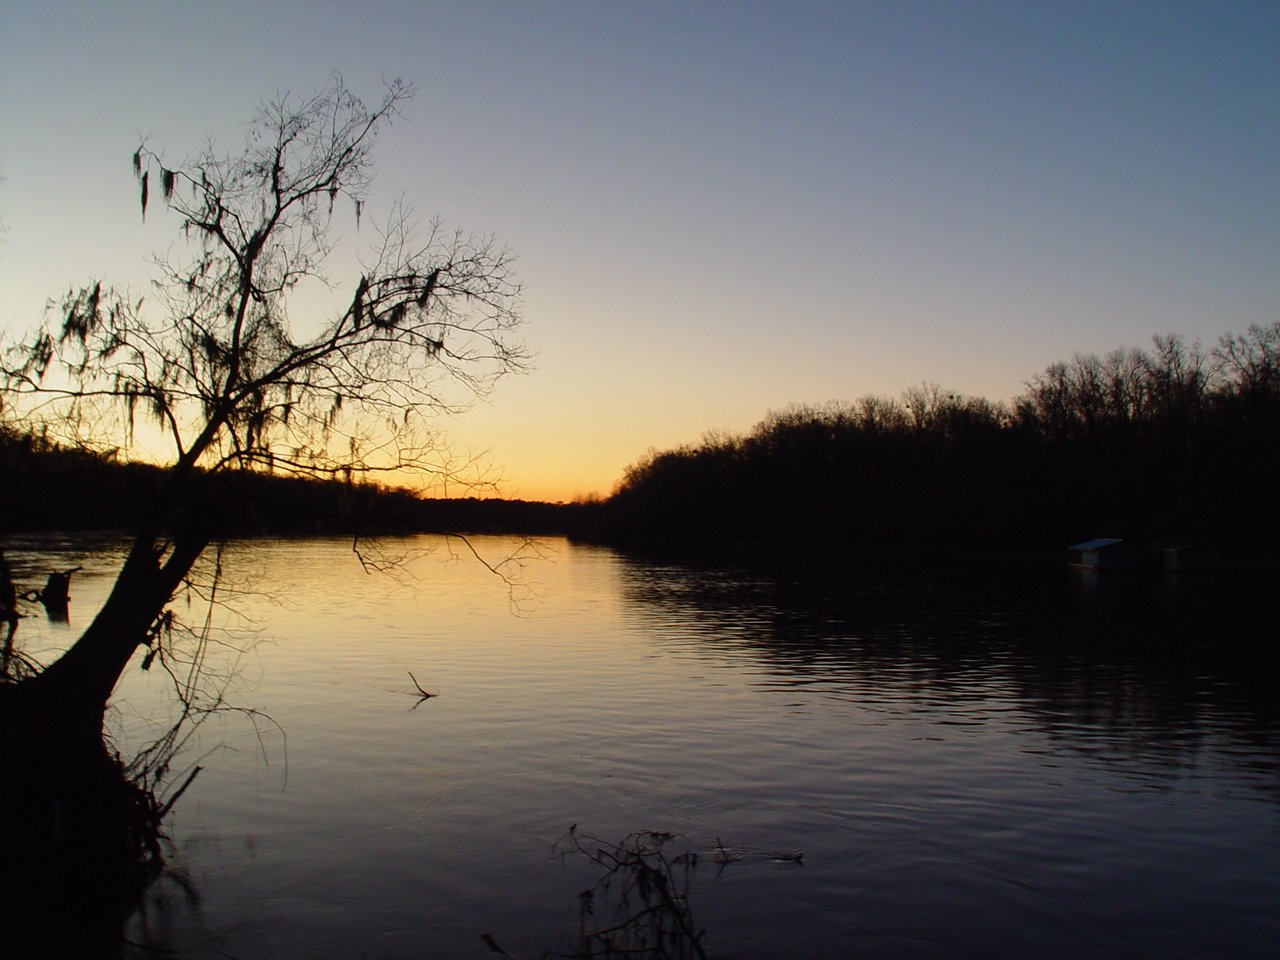 a lone tree on the bank of a river at sunset